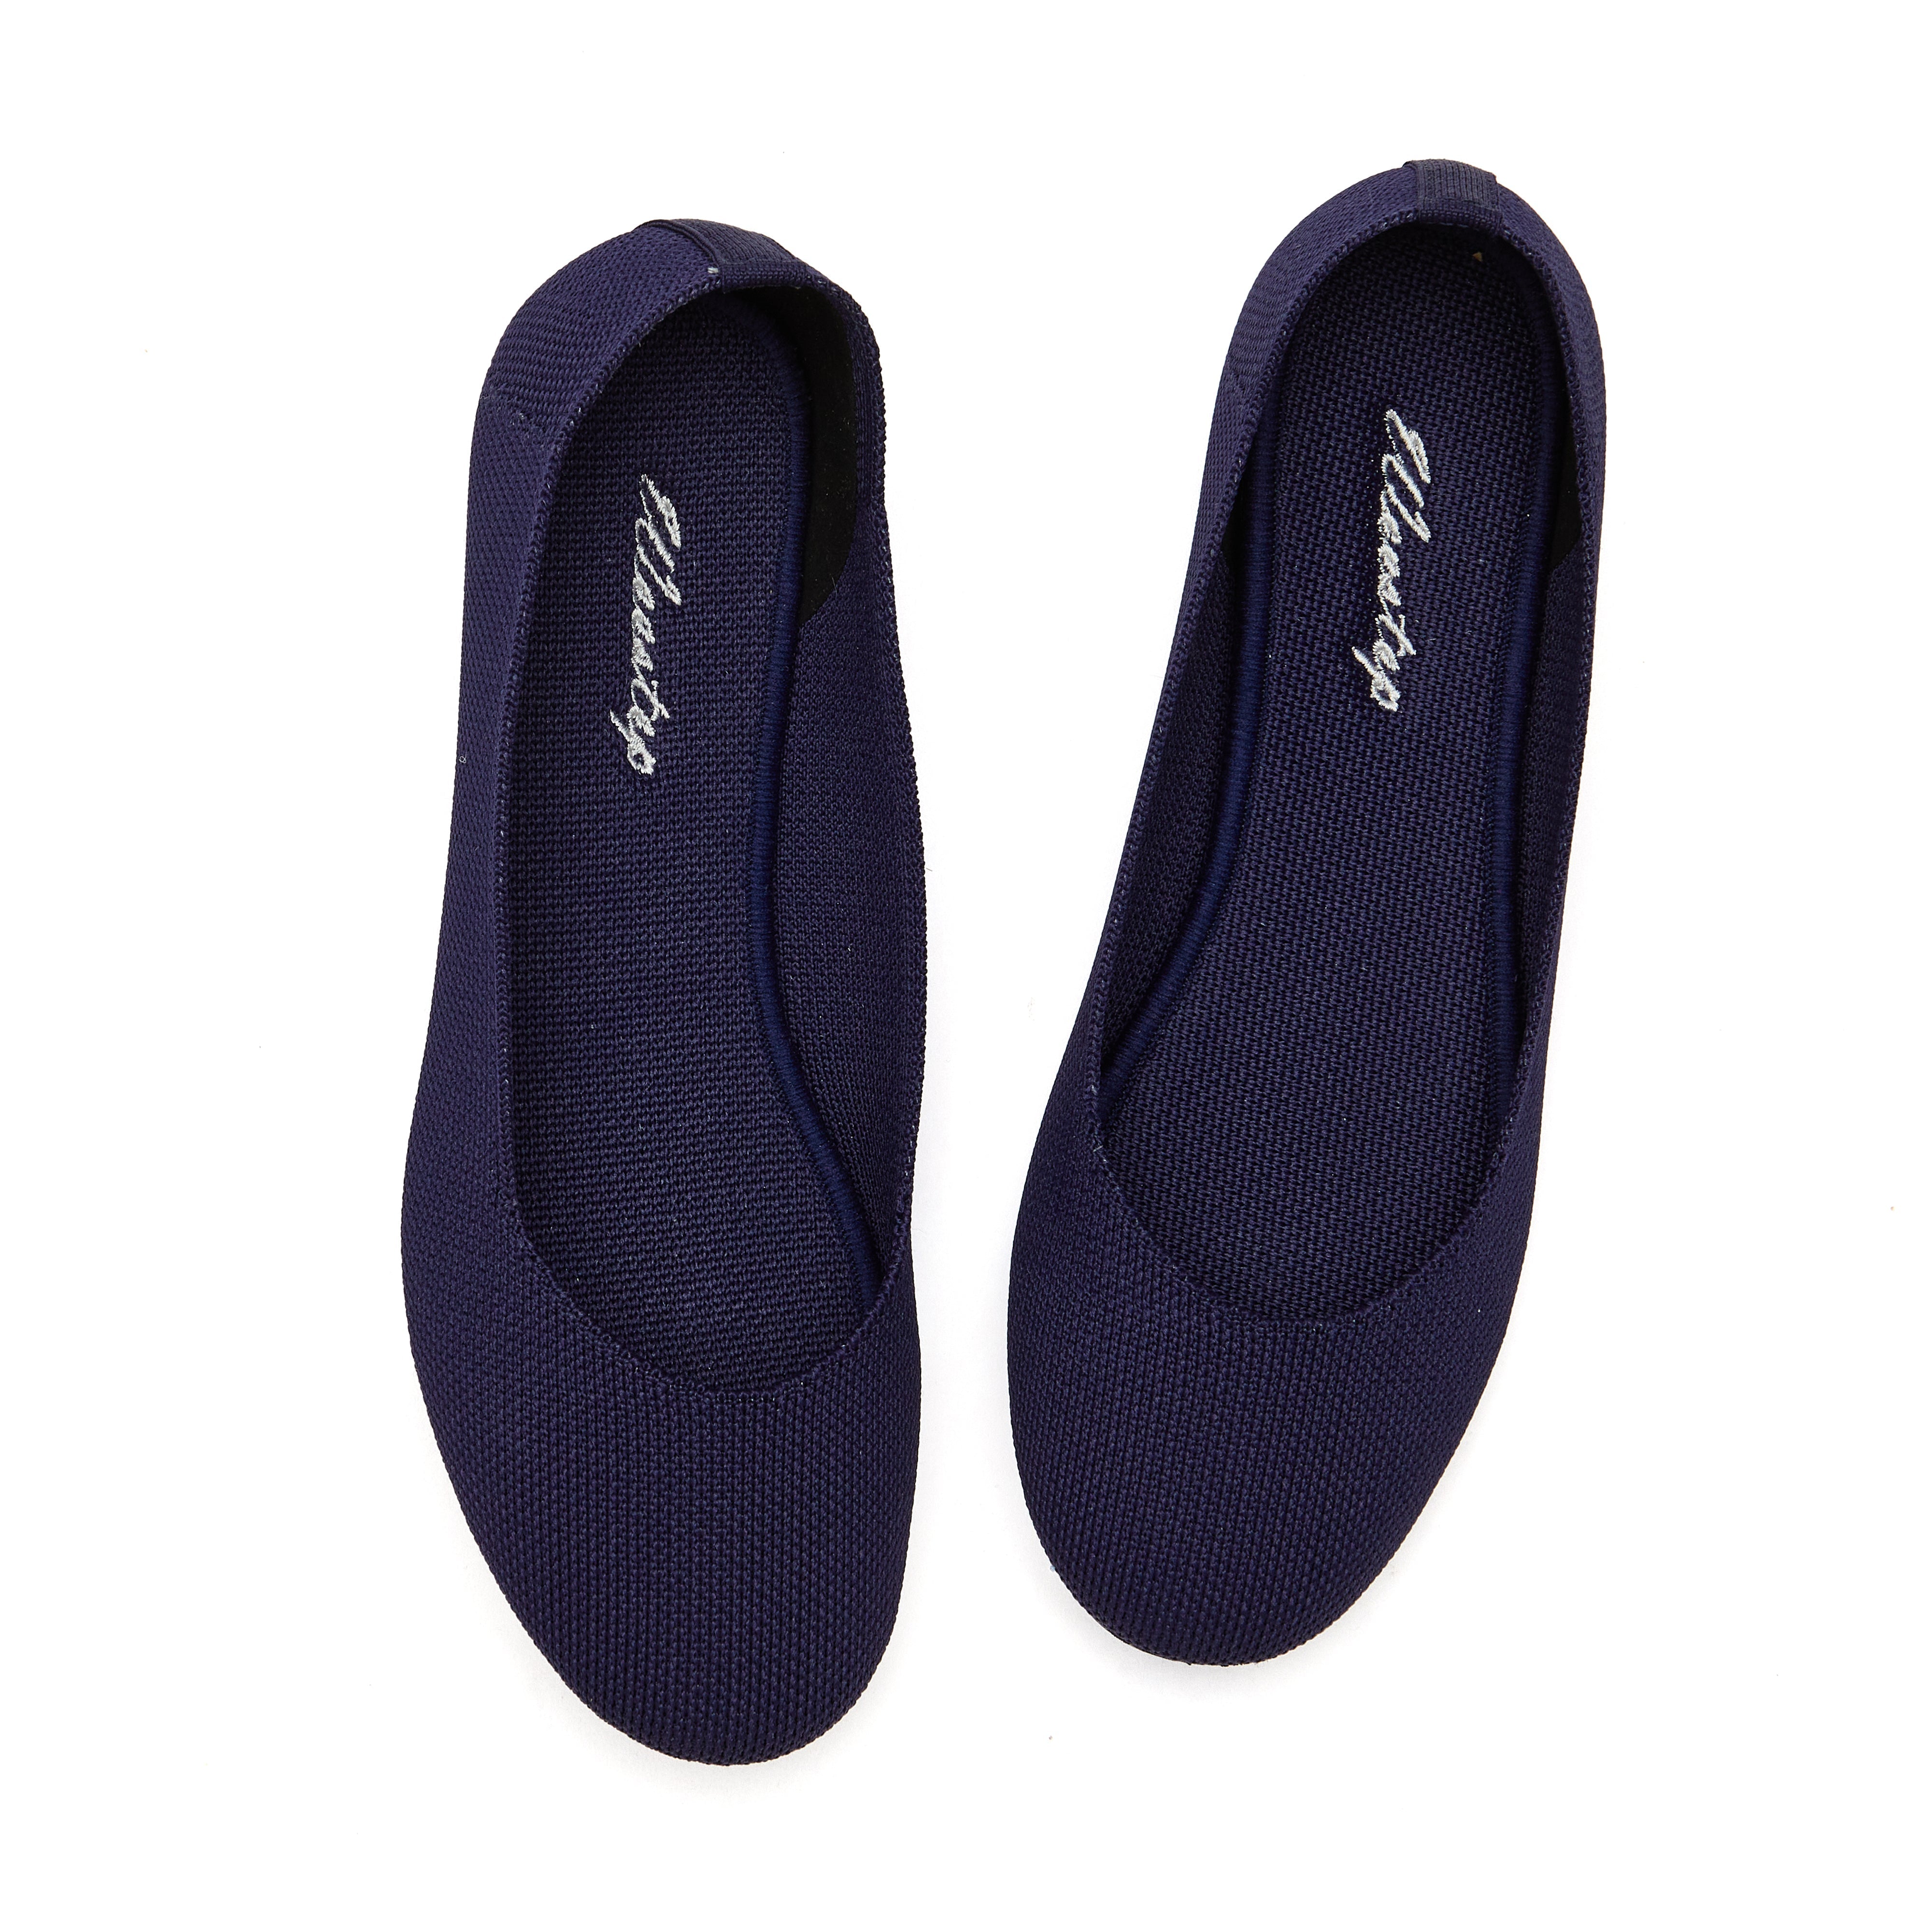 New Women Knit Woven Rounded Toe Flats